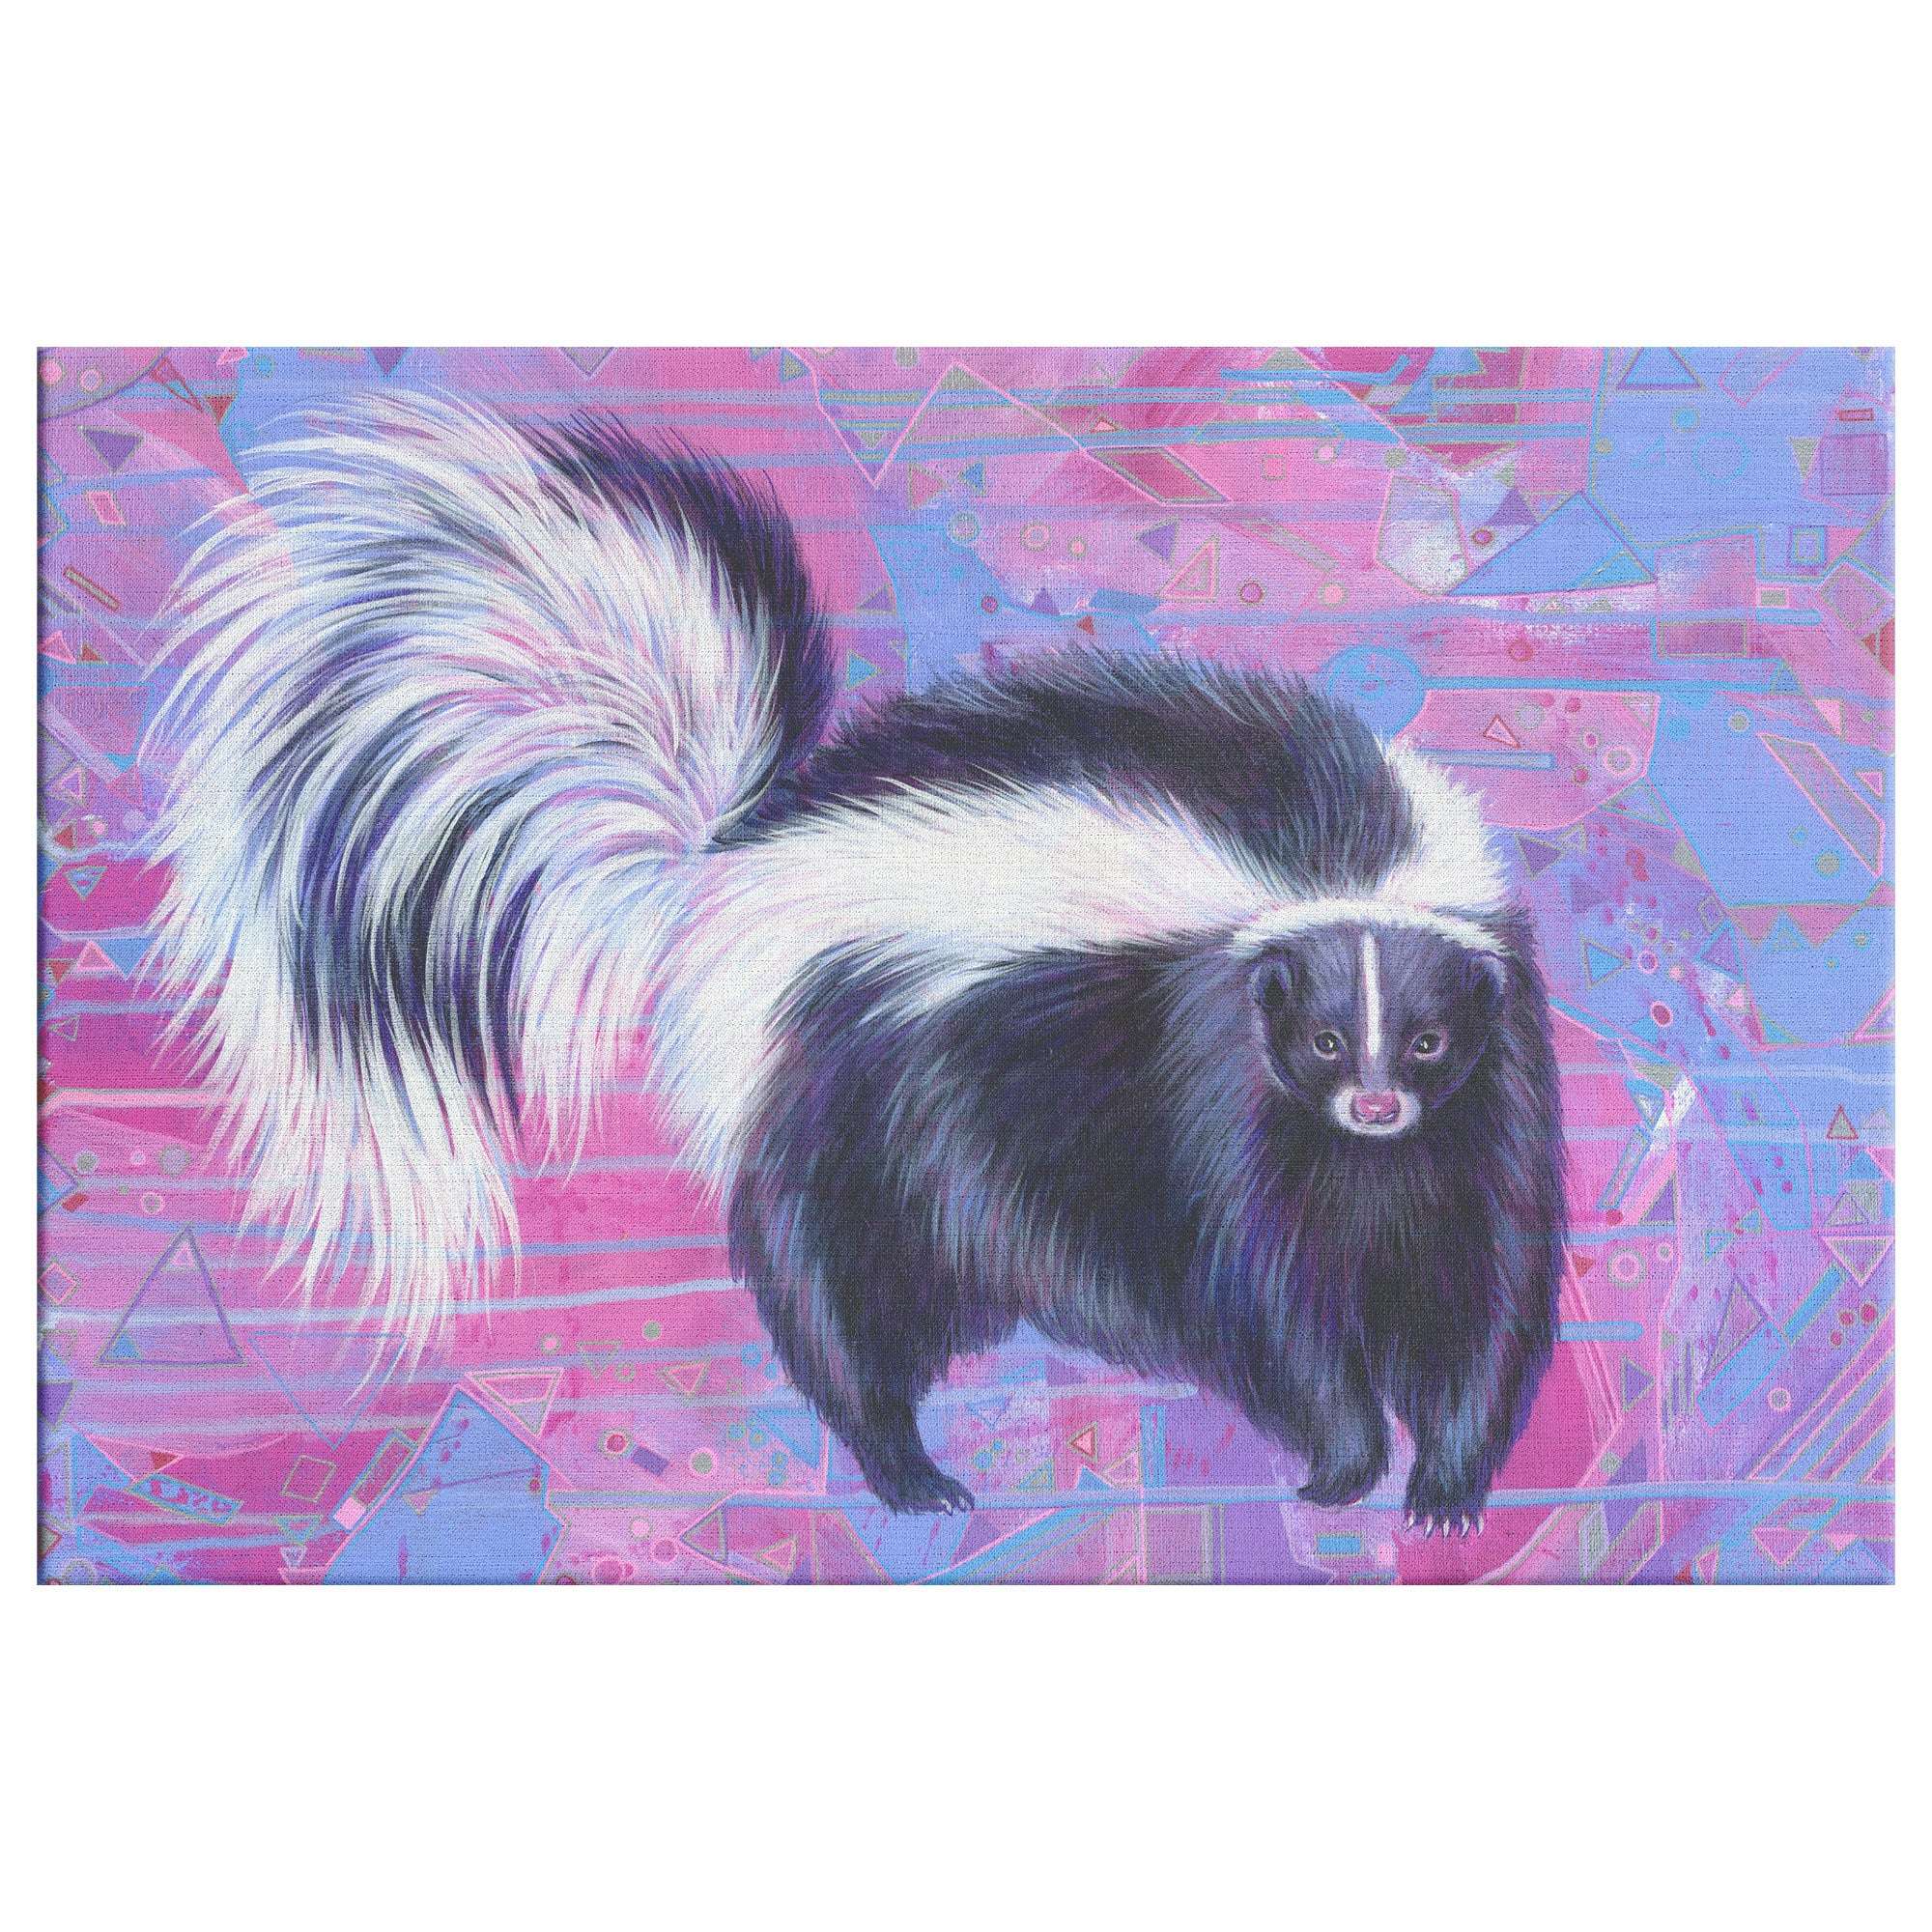 A colorful Canvas Skunk Art Print with a fluffy white and black tail on a vivid pink and purple geometric background.